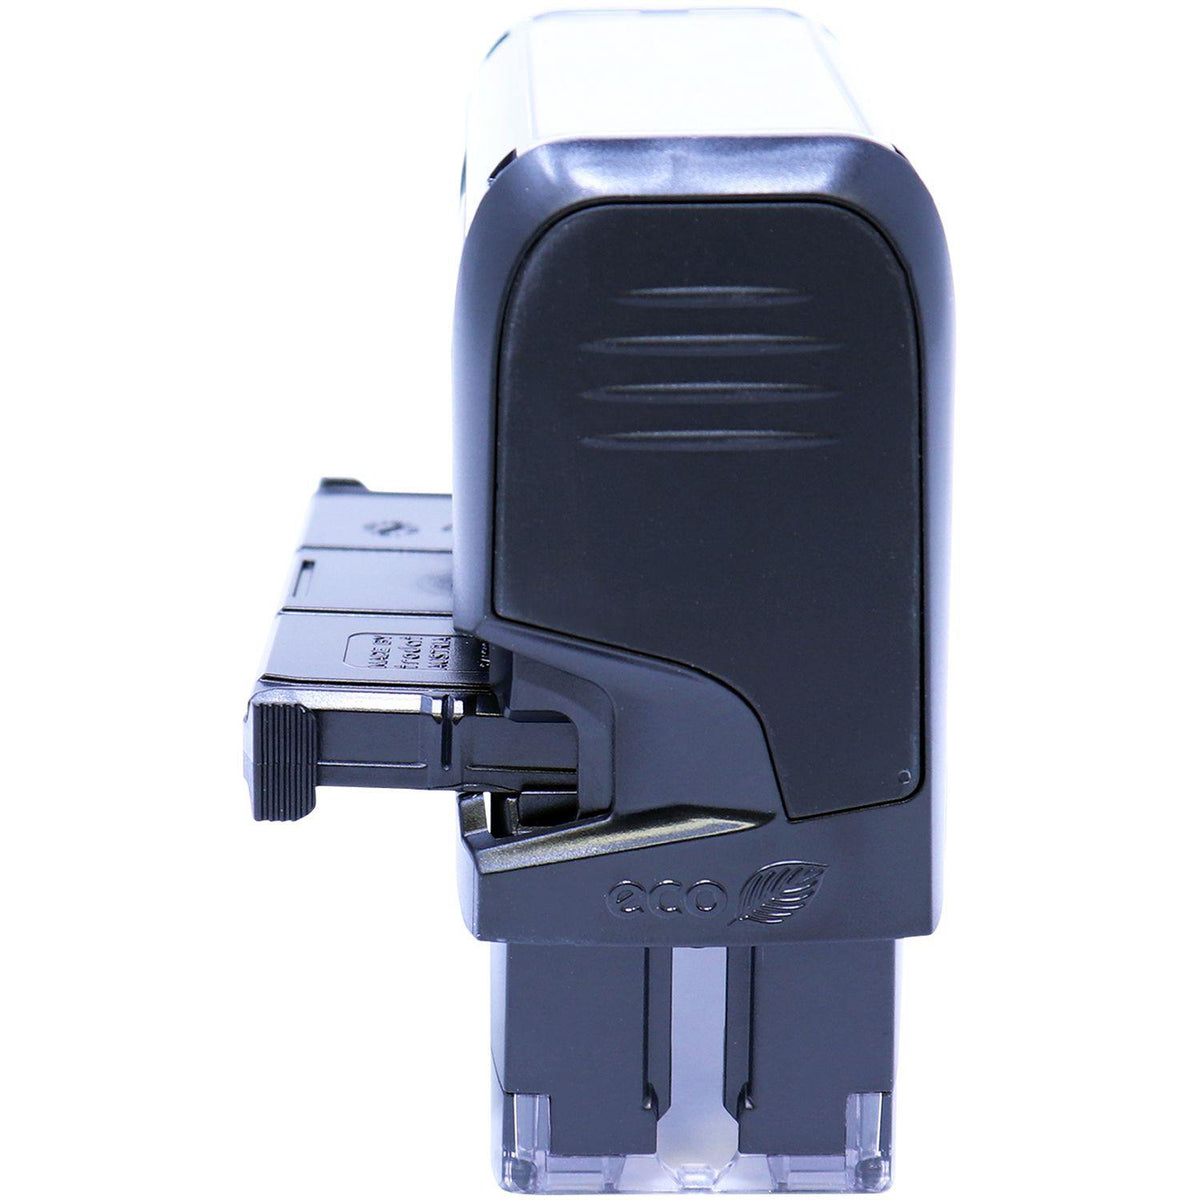 Self Inking Hot Document Stamp - Engineer Seal Stamps - Brand_Trodat, Impression Size_Small, Stamp Type_Self-Inking Stamp, Type of Use_Office, Type of Use_Professional